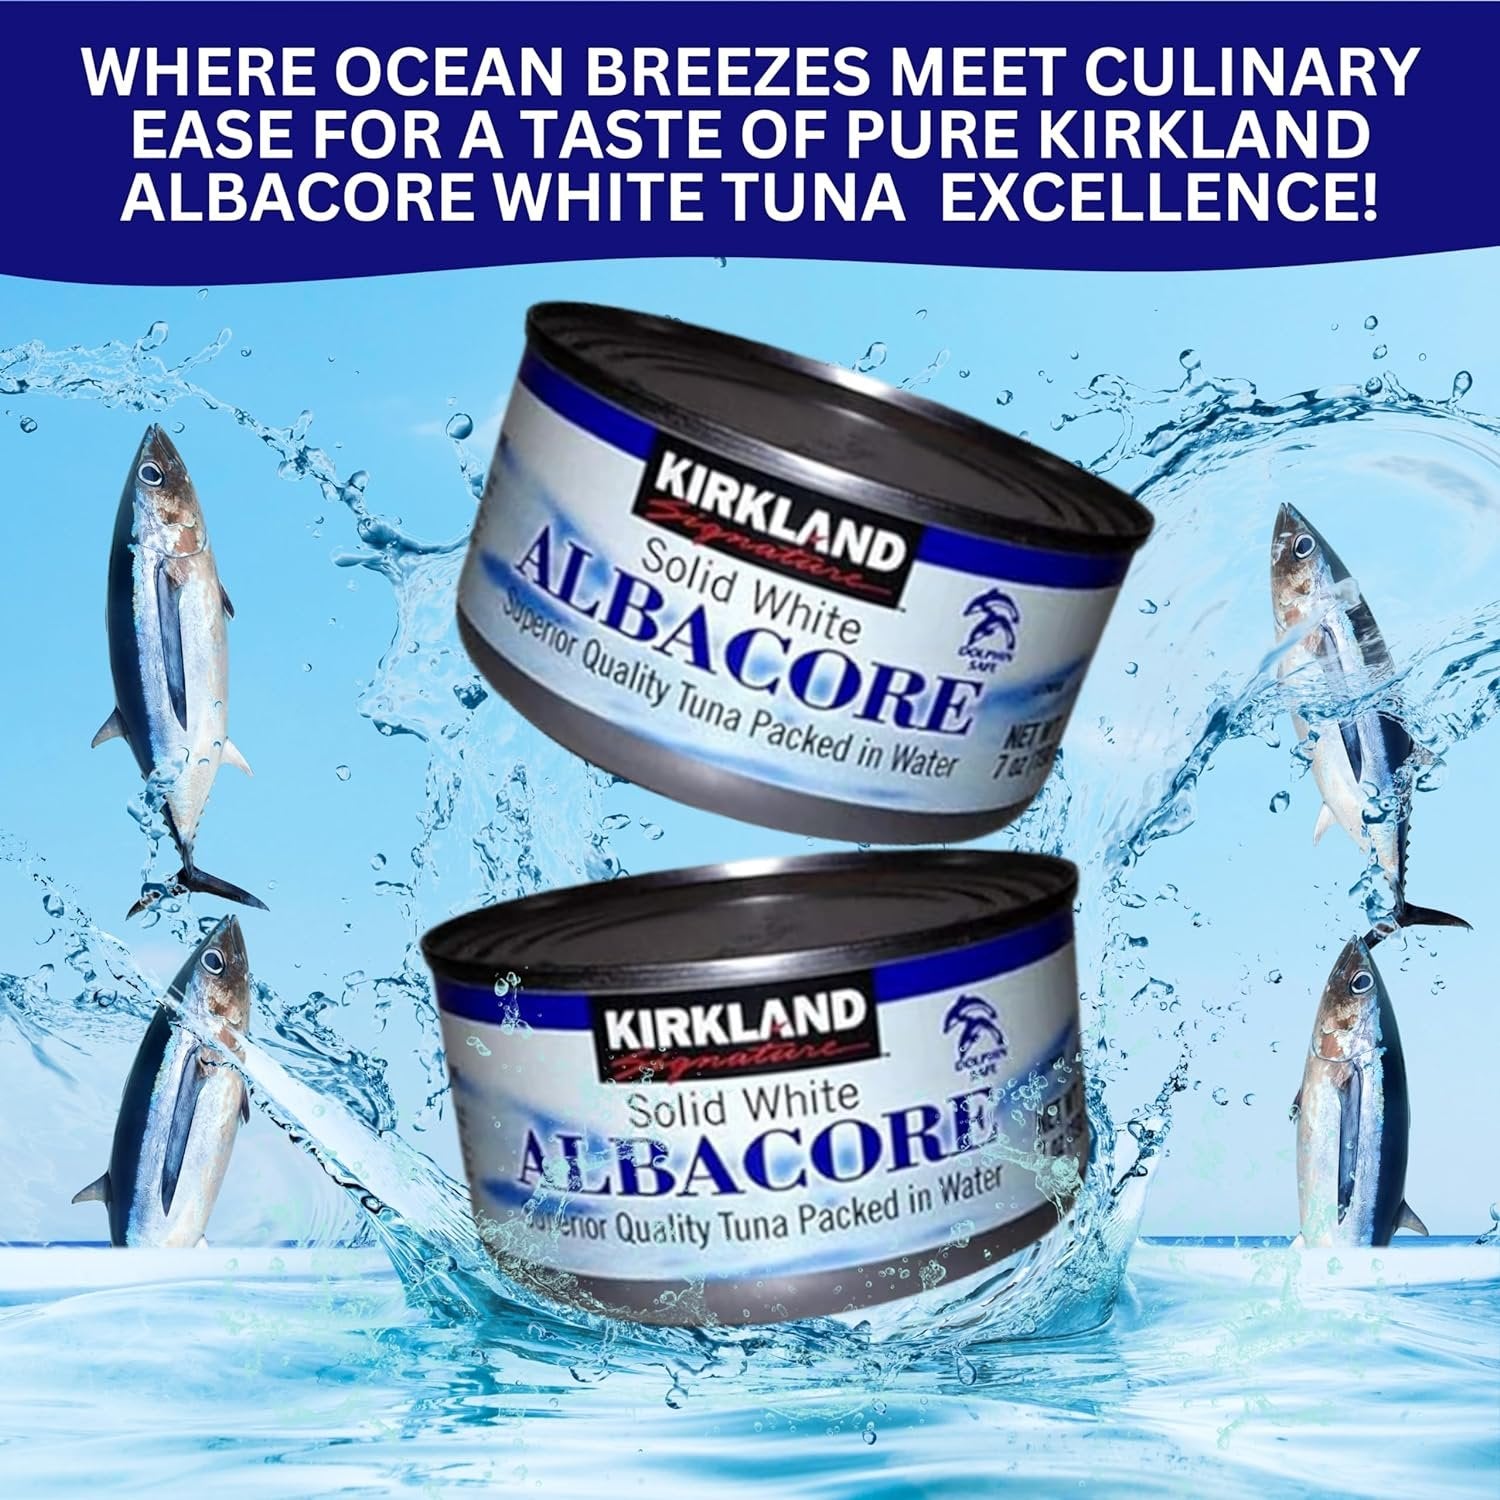 Kirkland Signature Solid White Albacore - Superior Quality Tuna Packed in Water - Pack of 8 - with Keychain